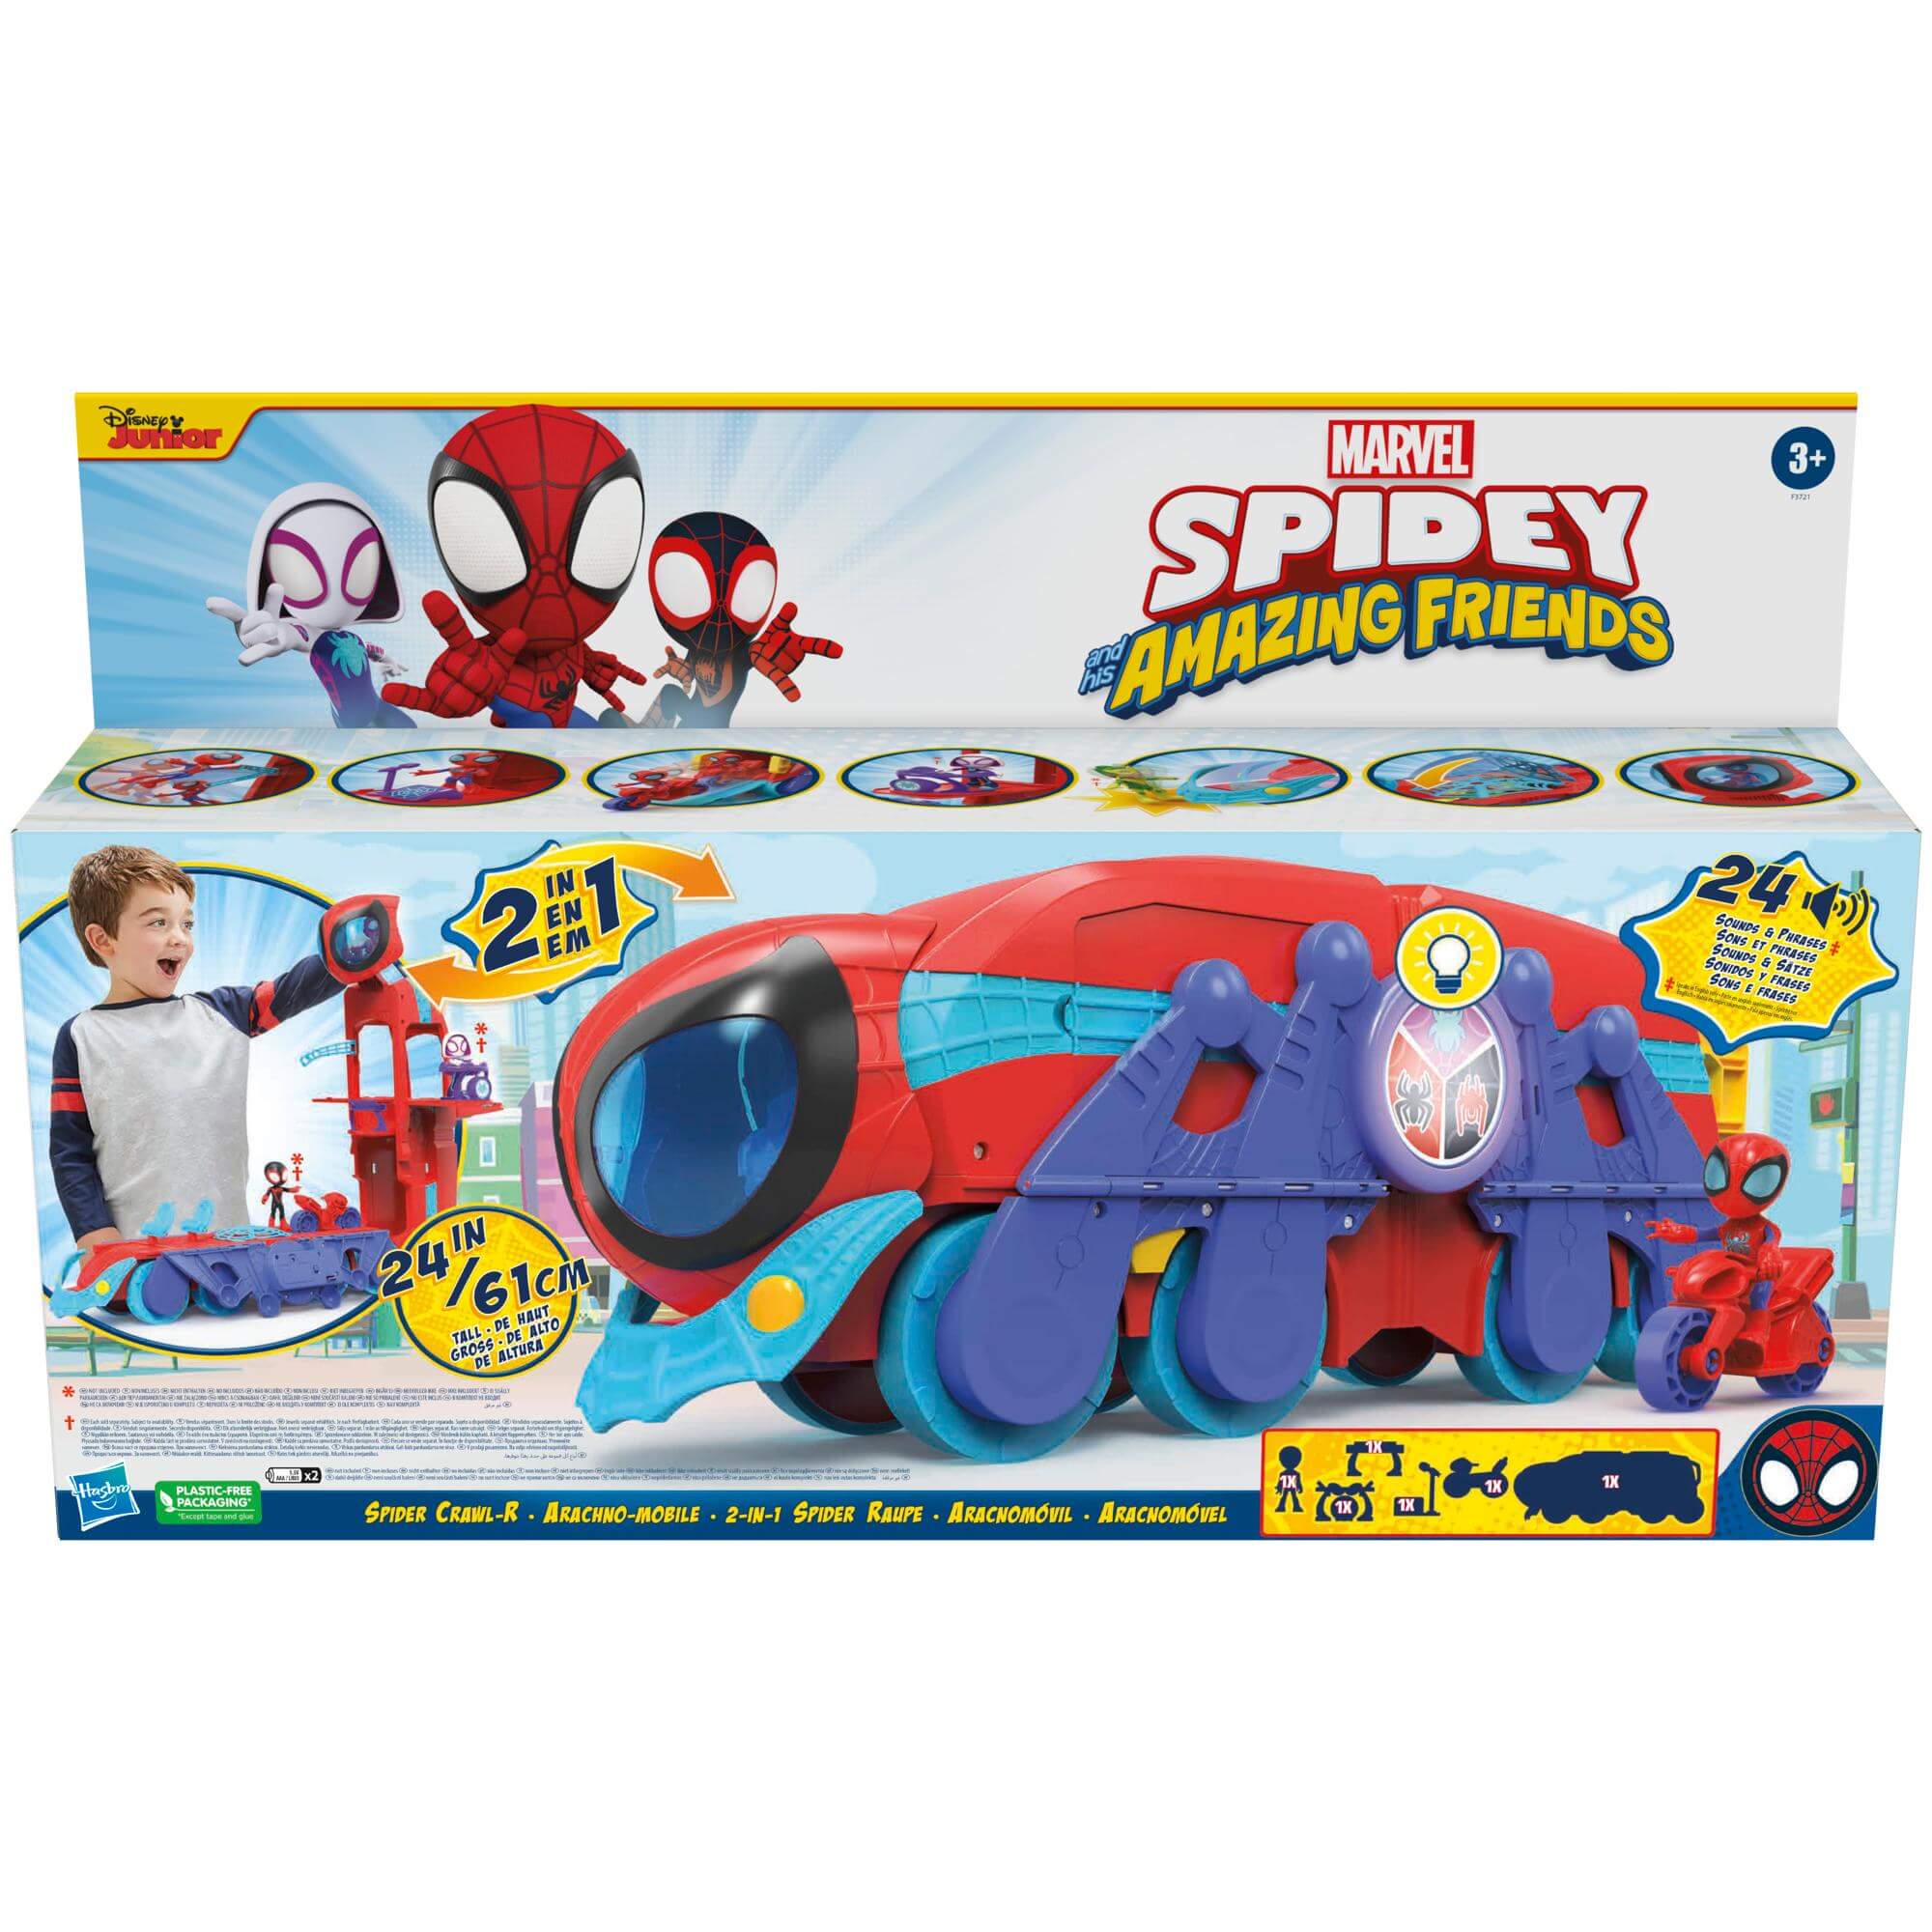 Marvel Spidey and His Amazing Friends Spider Crawl-R 2-in-1 Deluxe Headquarters Playset